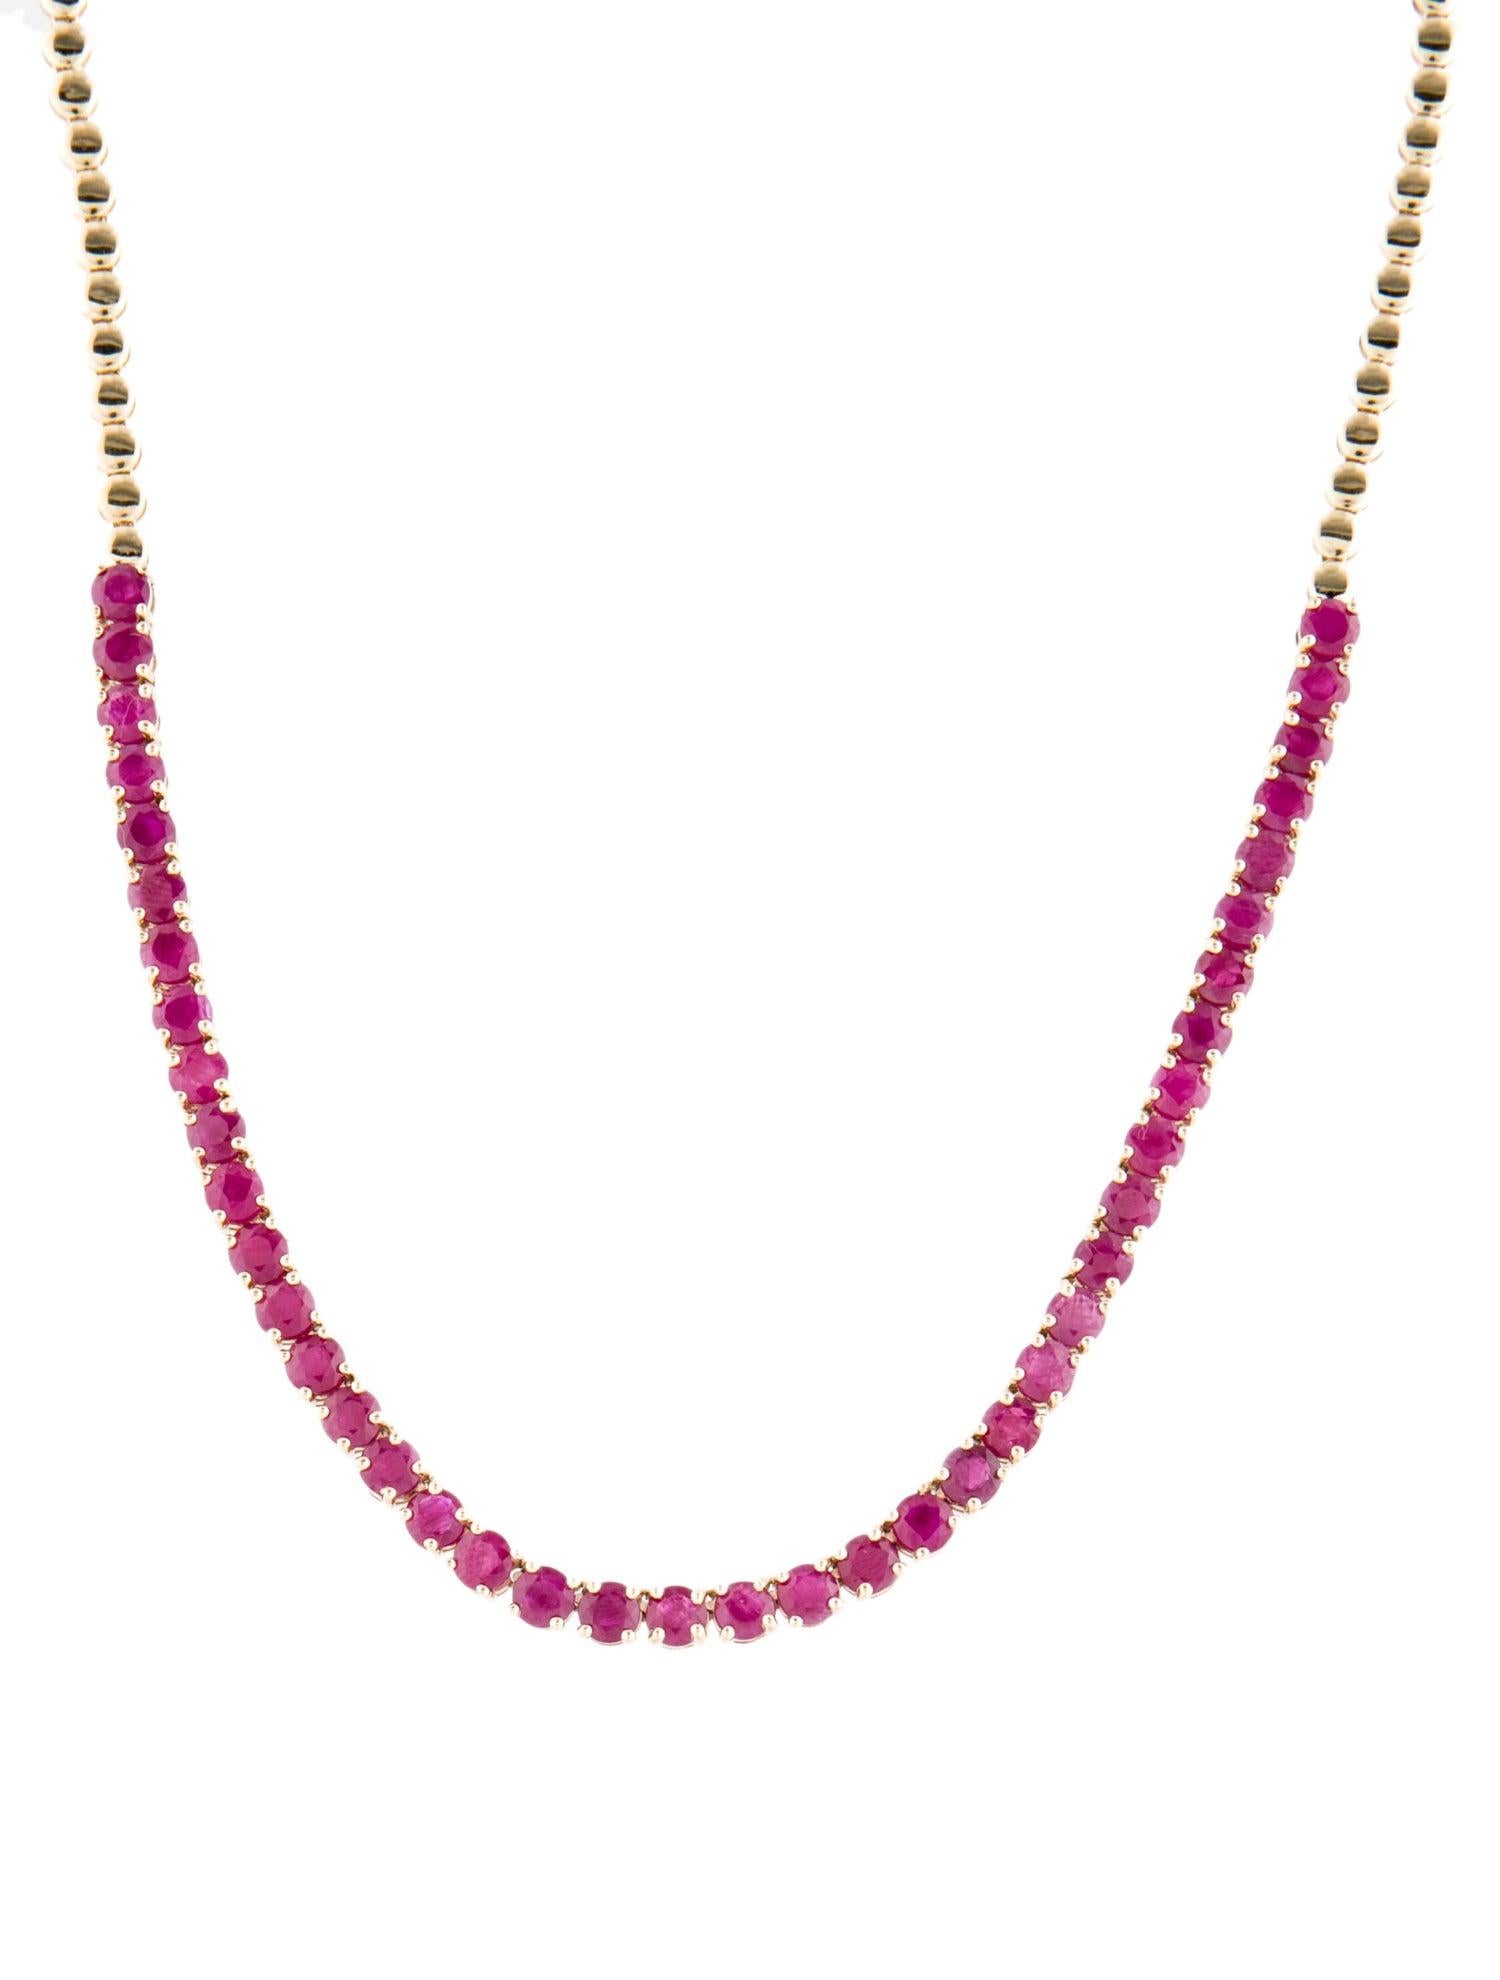 Brilliant Cut 14K Ruby Chain Necklace 16.40ctw - Exquisite Jewelry for Elegant Sophistication For Sale